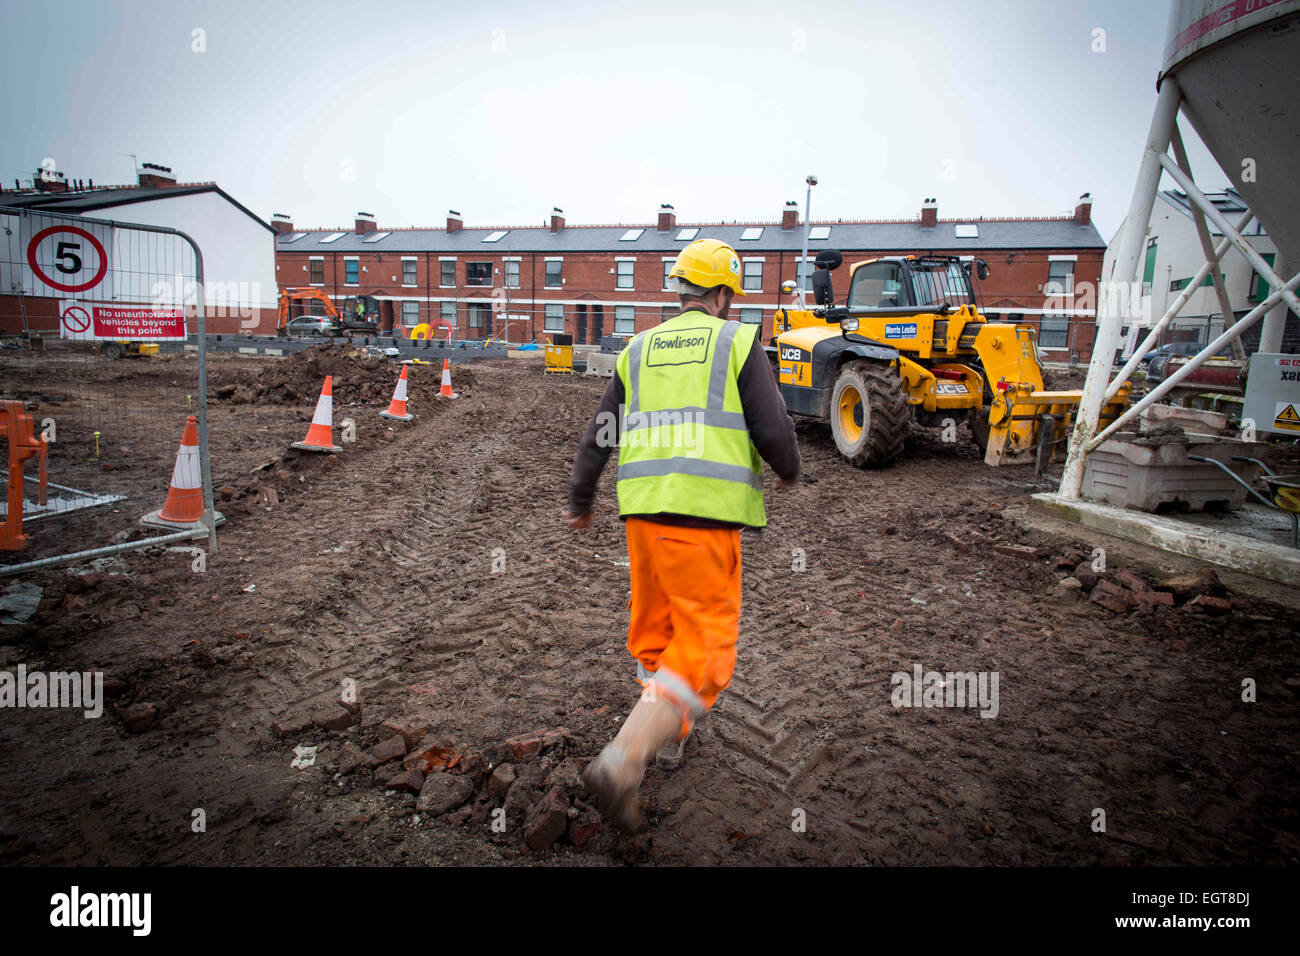 A worker from Rowlinson on a construction site in Moss Side Manchester Stock Photo